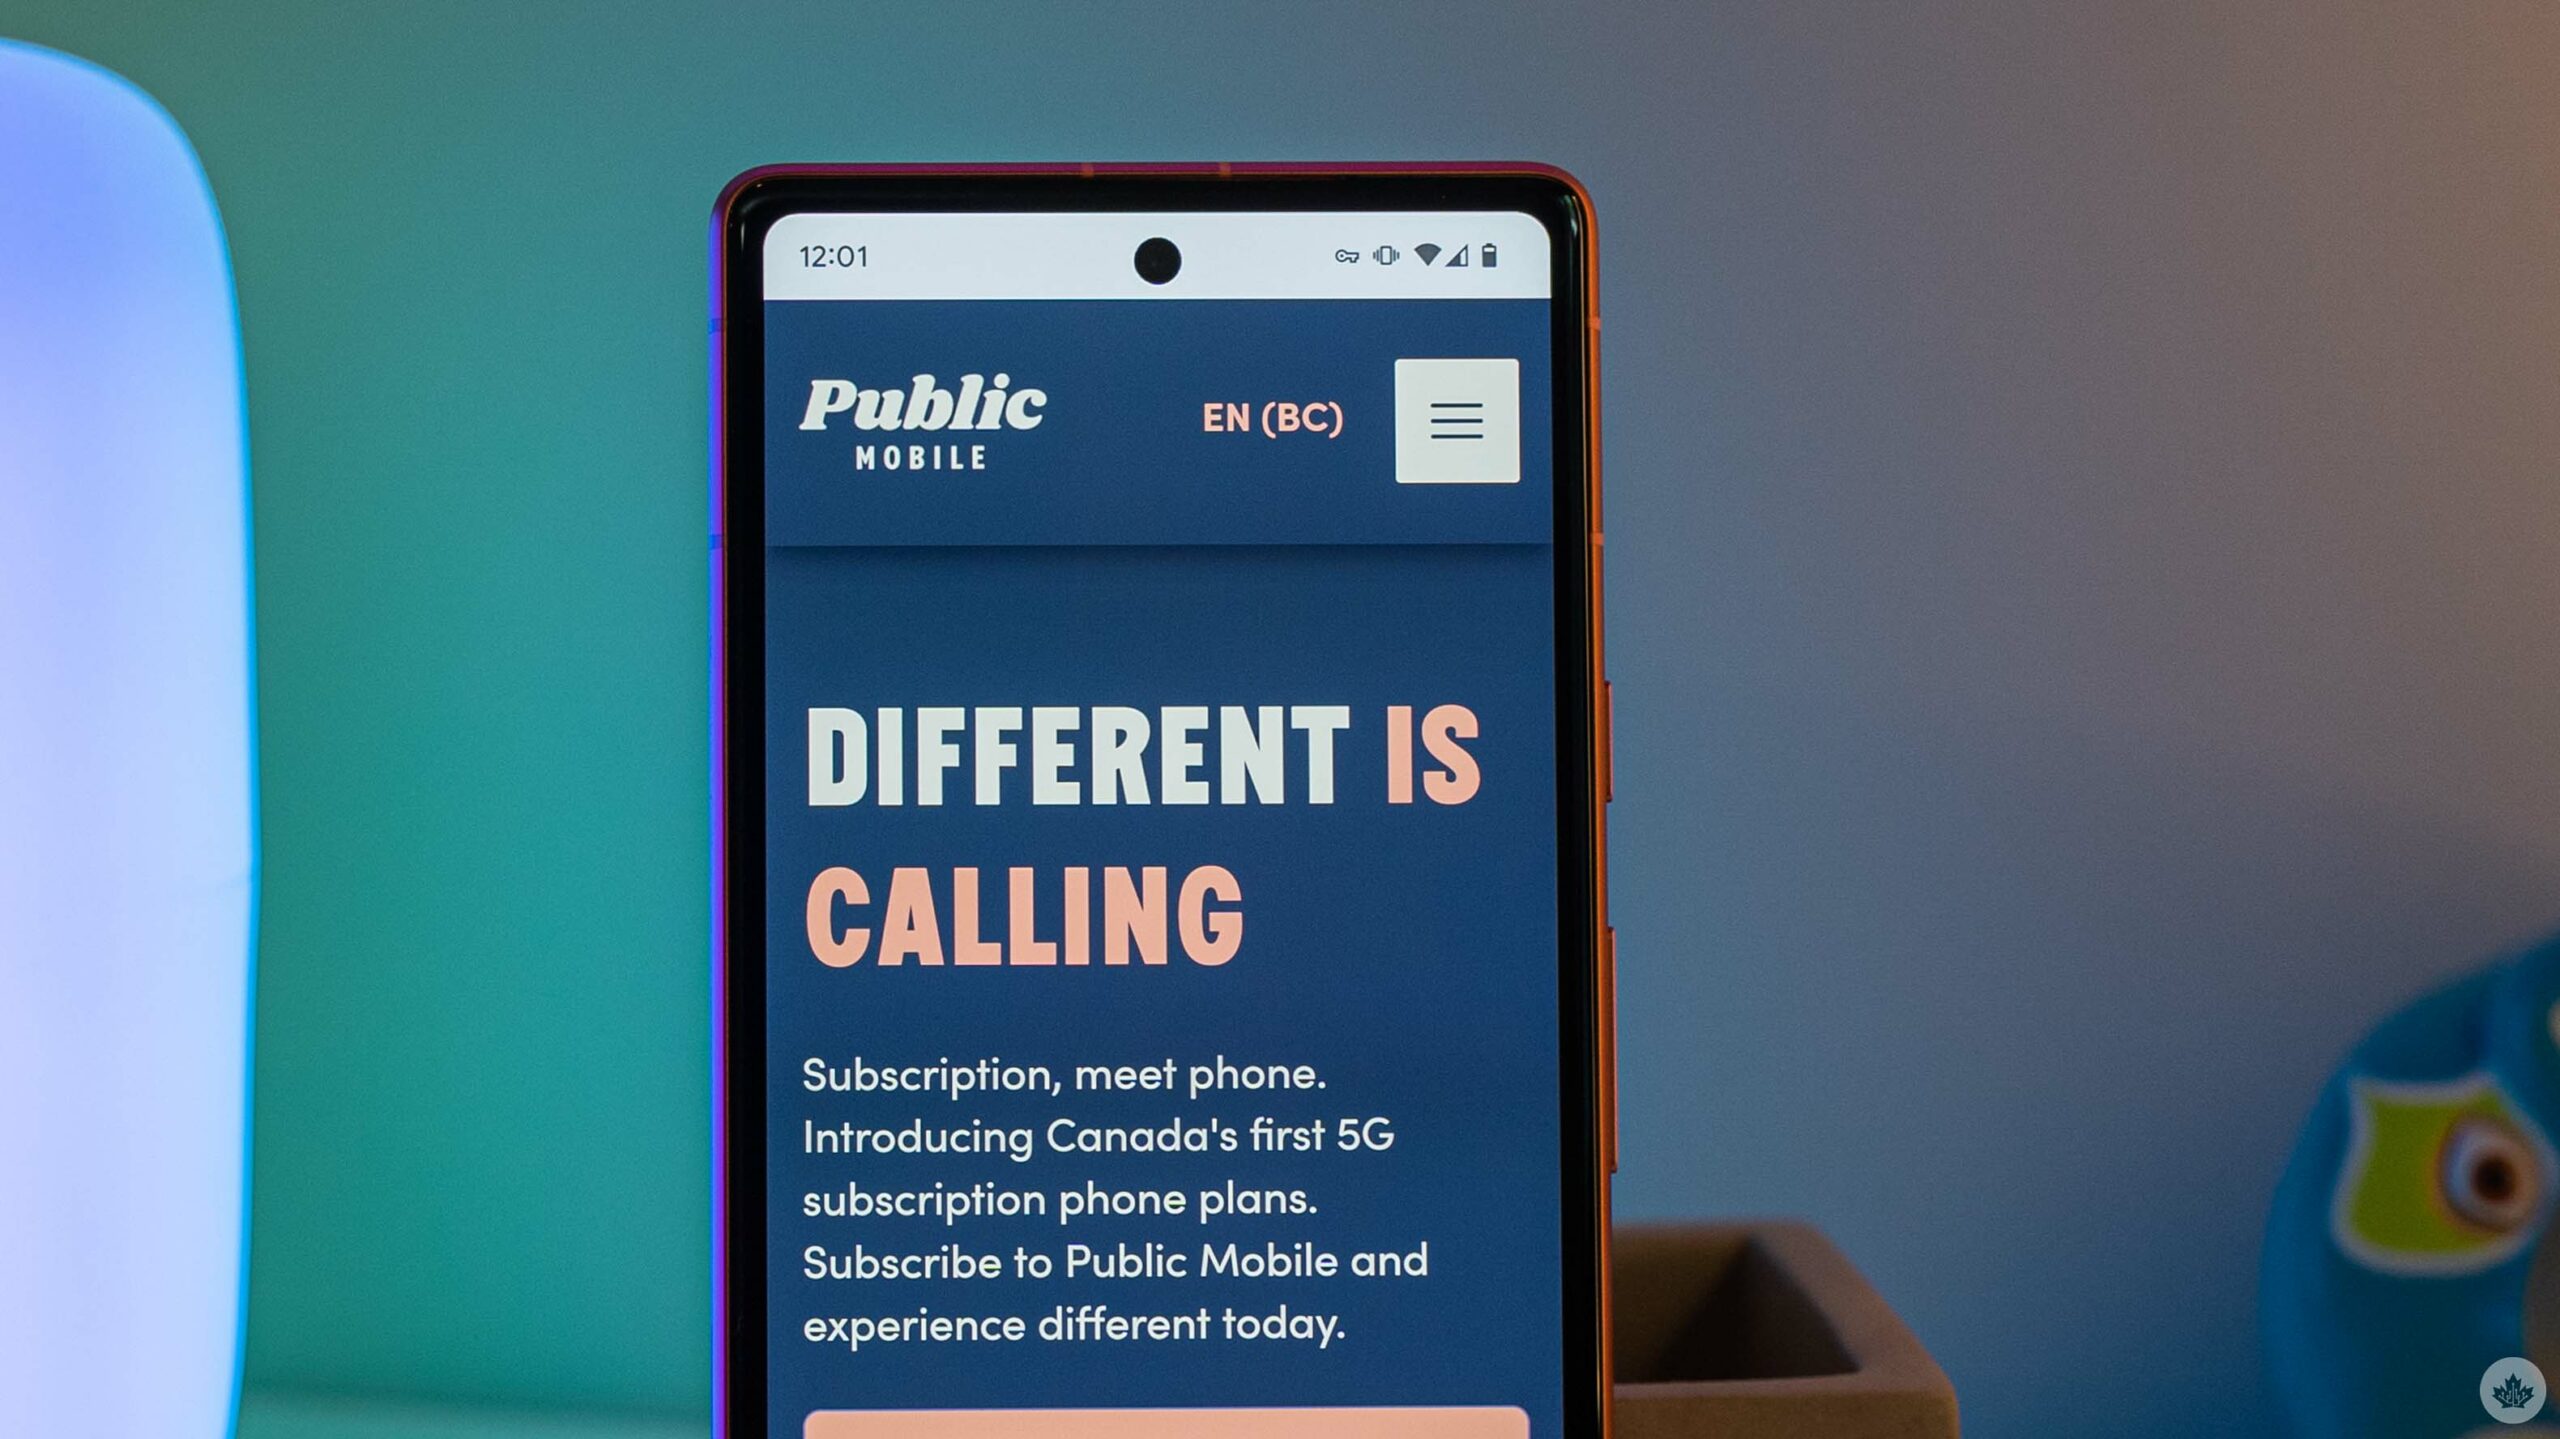 Public Mobile rolls out free 5G network trial